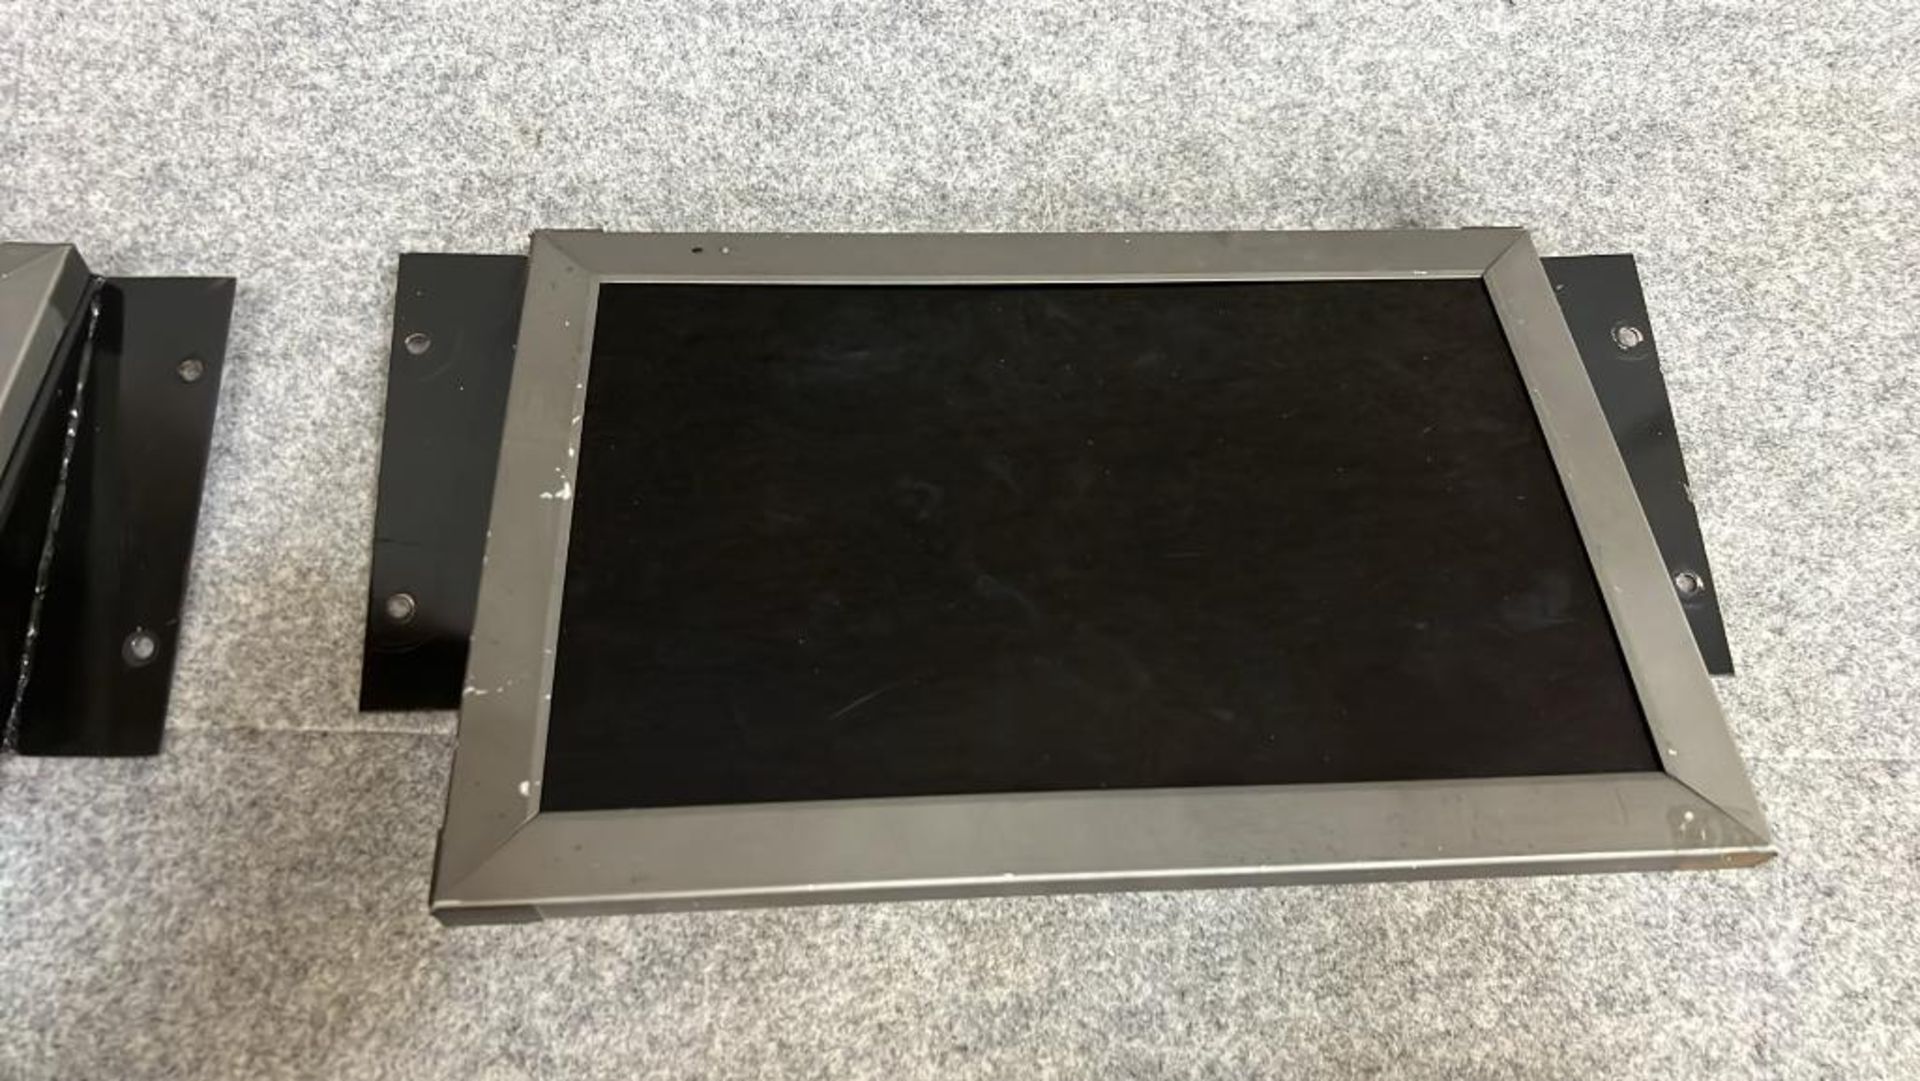 (Qty 4) 15.4"LCD monitors with 4x psu's in two variants of metal mounting brackets Model: CH-LCD 154 - Image 4 of 14